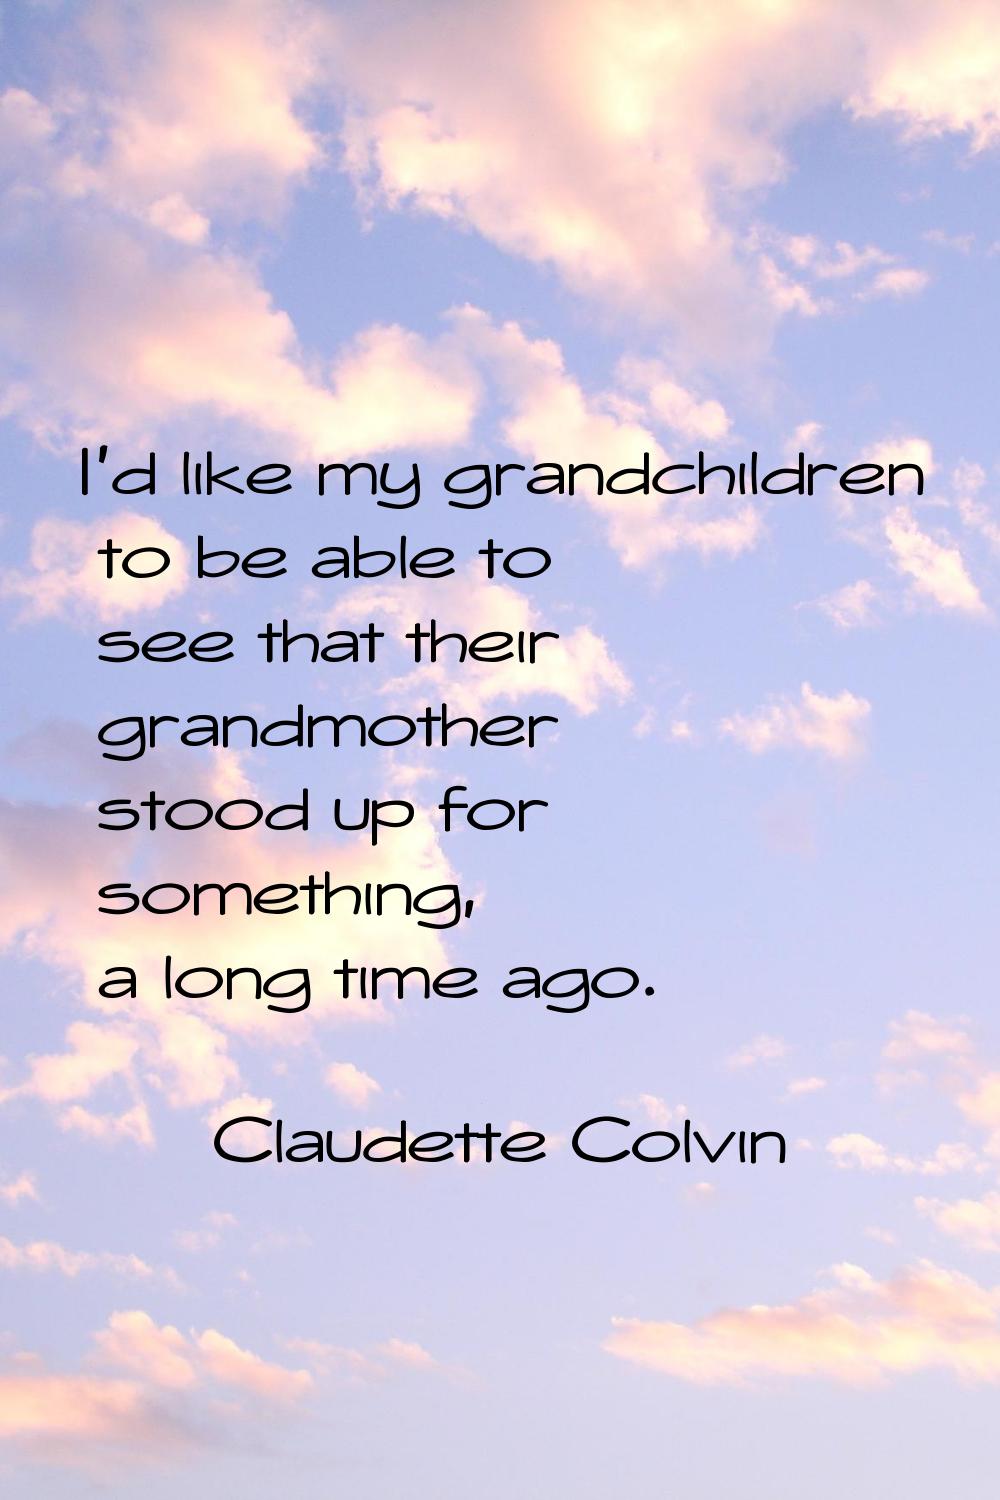 I'd like my grandchildren to be able to see that their grandmother stood up for something, a long t